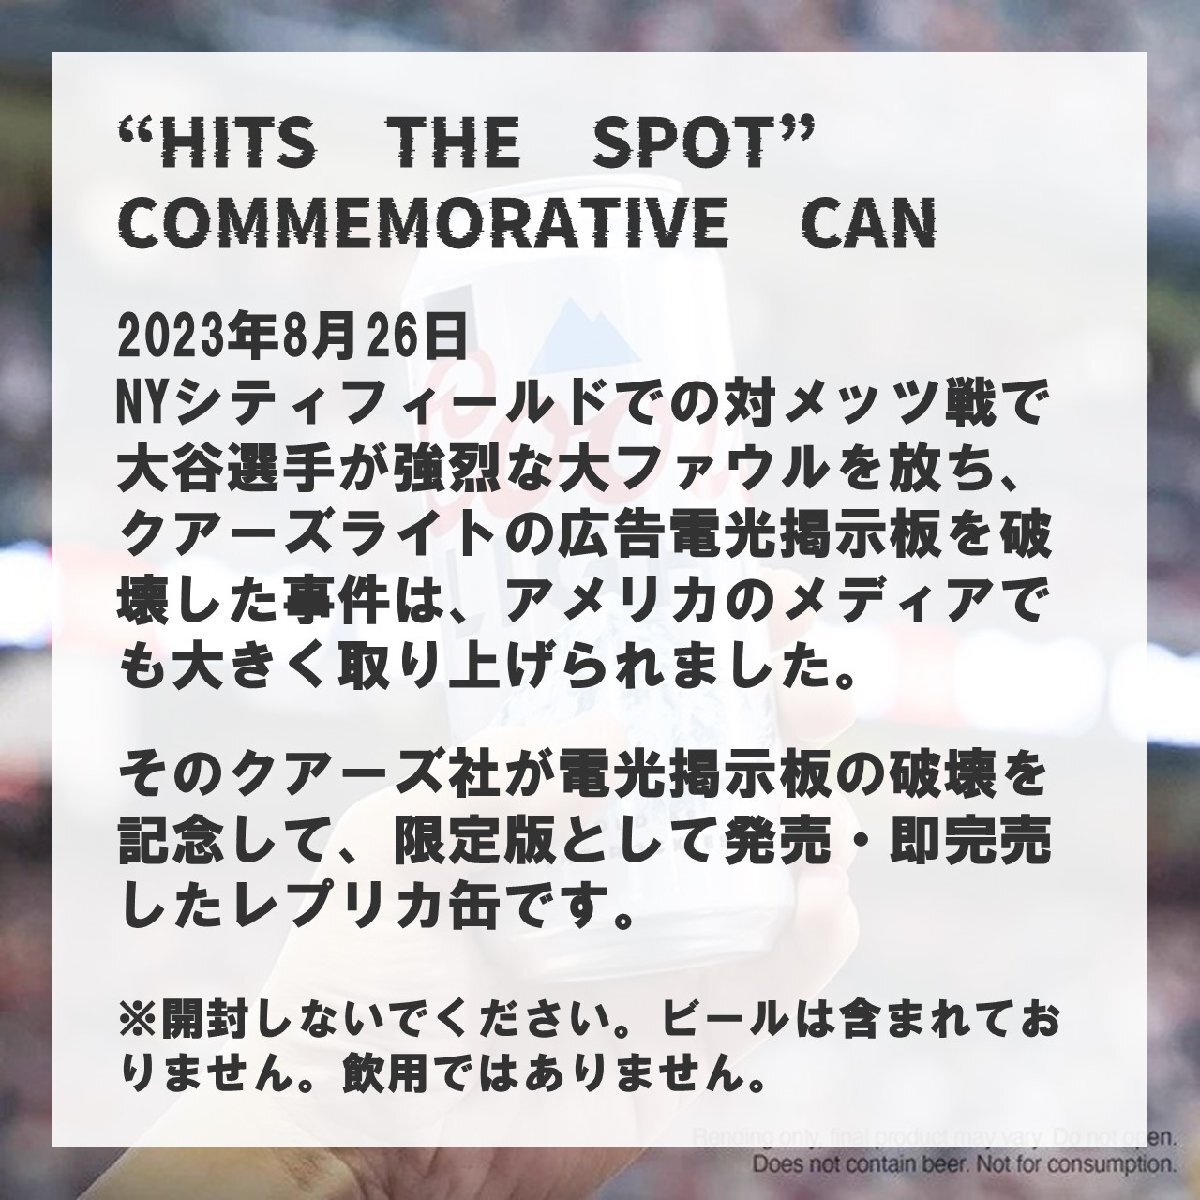 【MS】大谷翔平 記念グッズ 電光掲示板破壊 記念缶 クアーズライト HITS THE SPOT COMMEMORATIVE CAN ドジャース_画像3